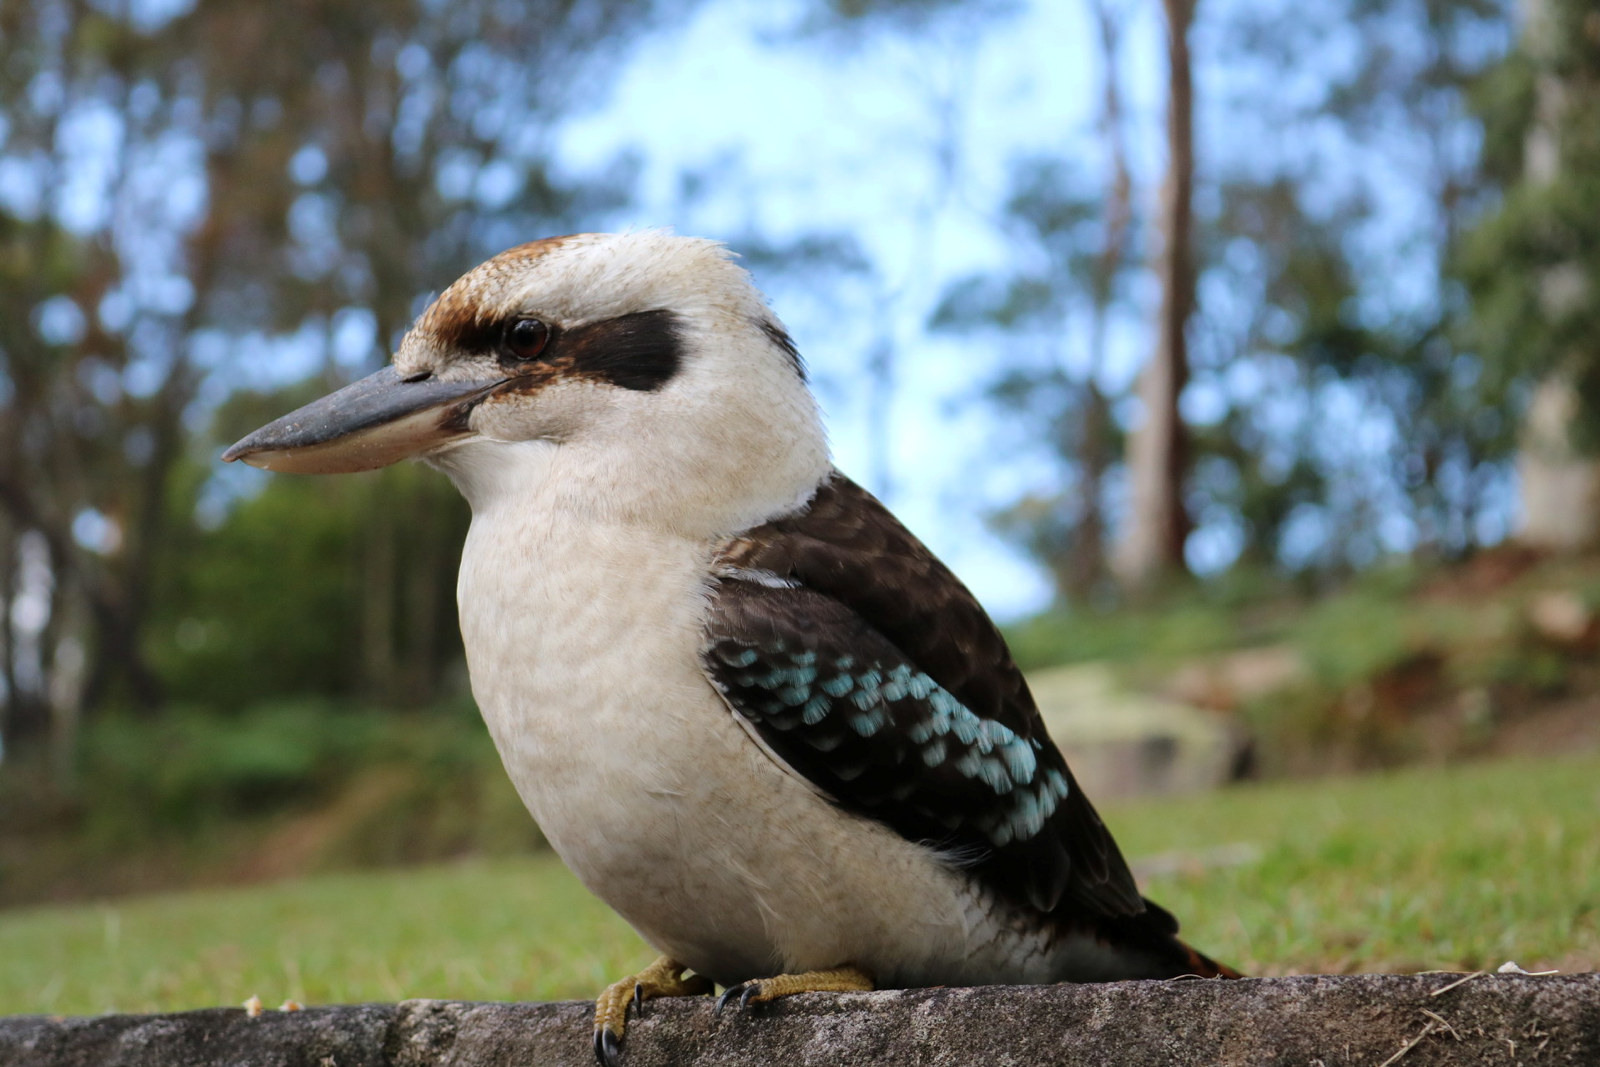 A close up photo of the kookaburra that visited us at Rose Seidler house